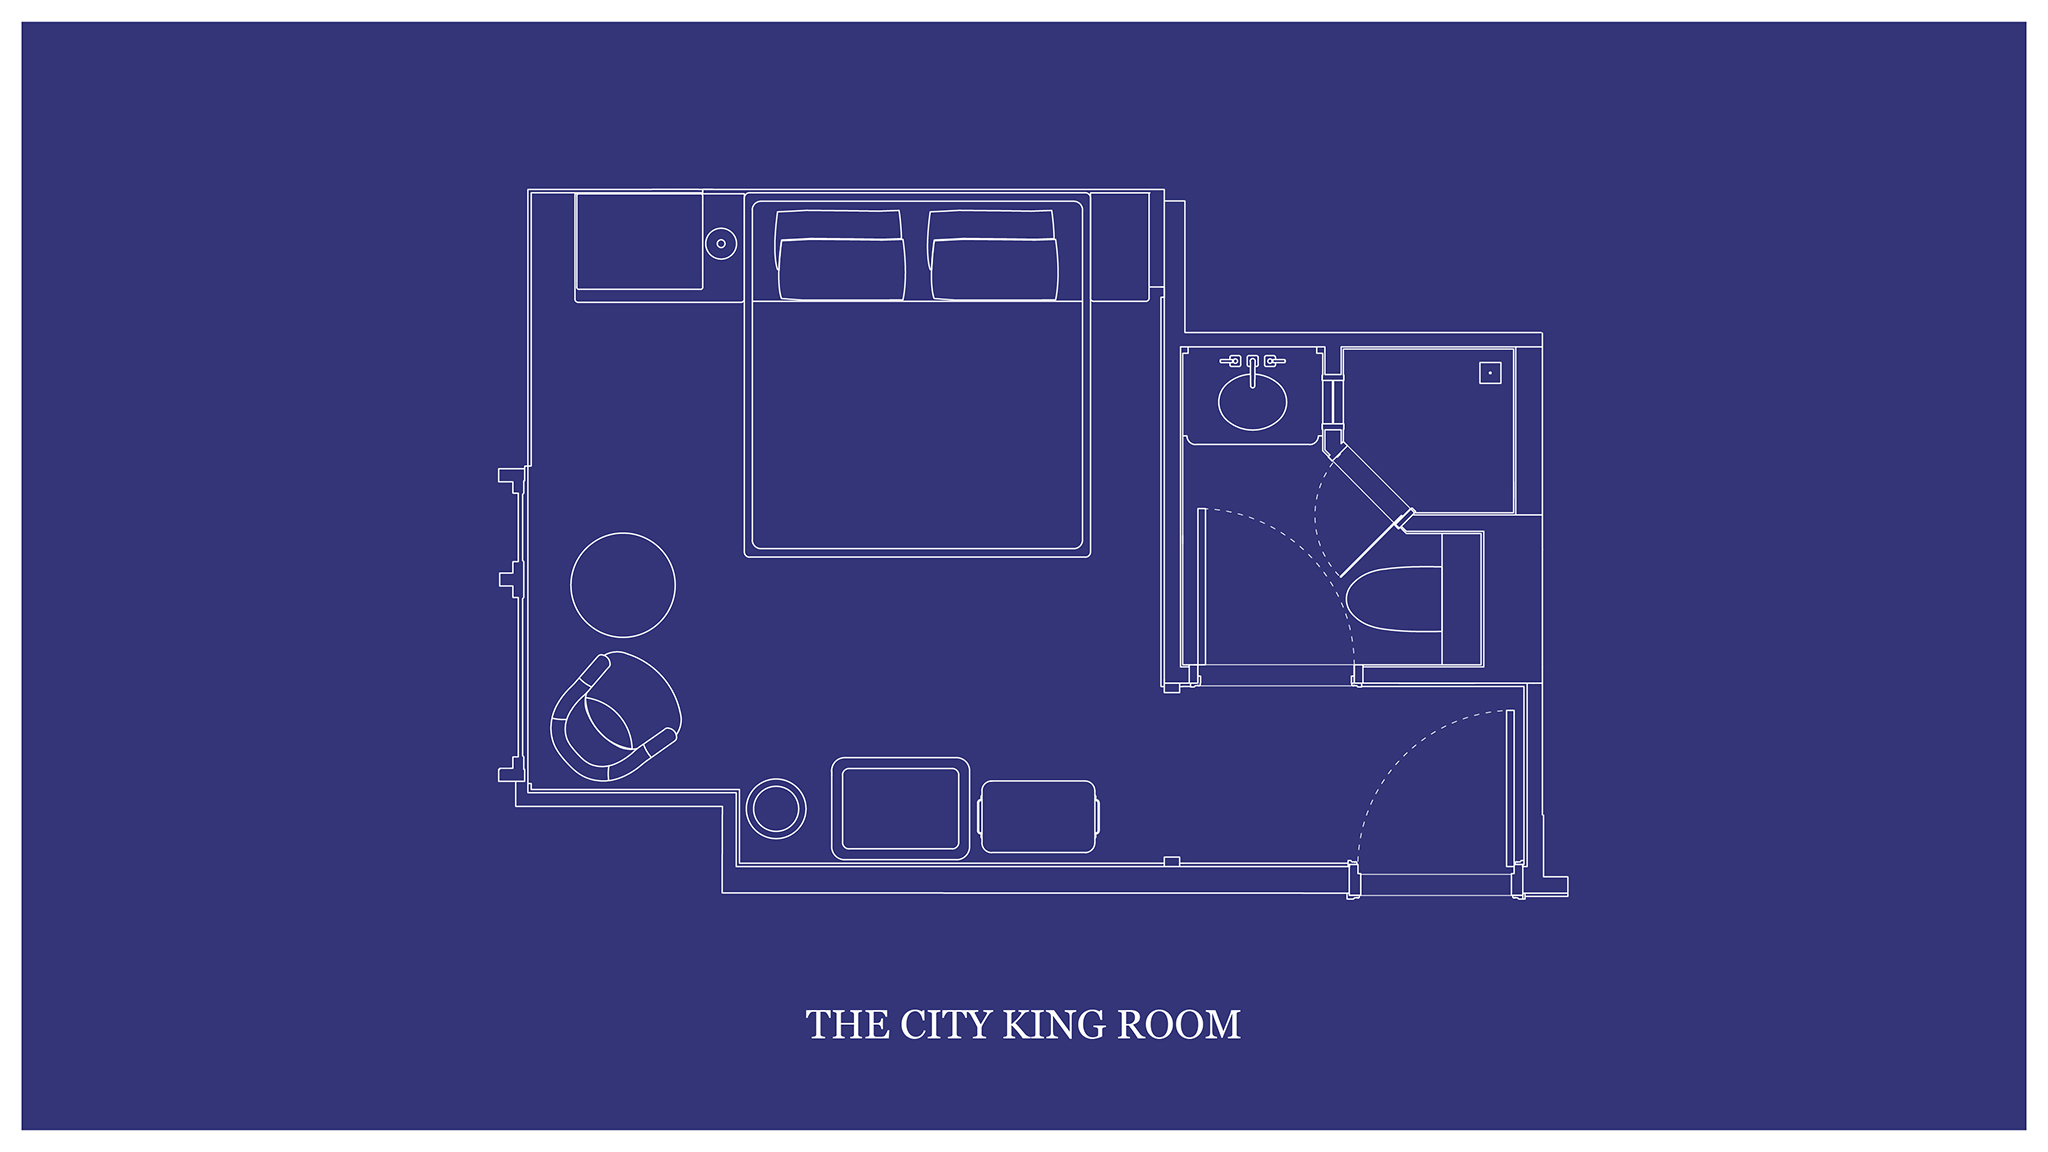 Architectural layout map of "THE CITY KING ROOM" presented in blueprints.